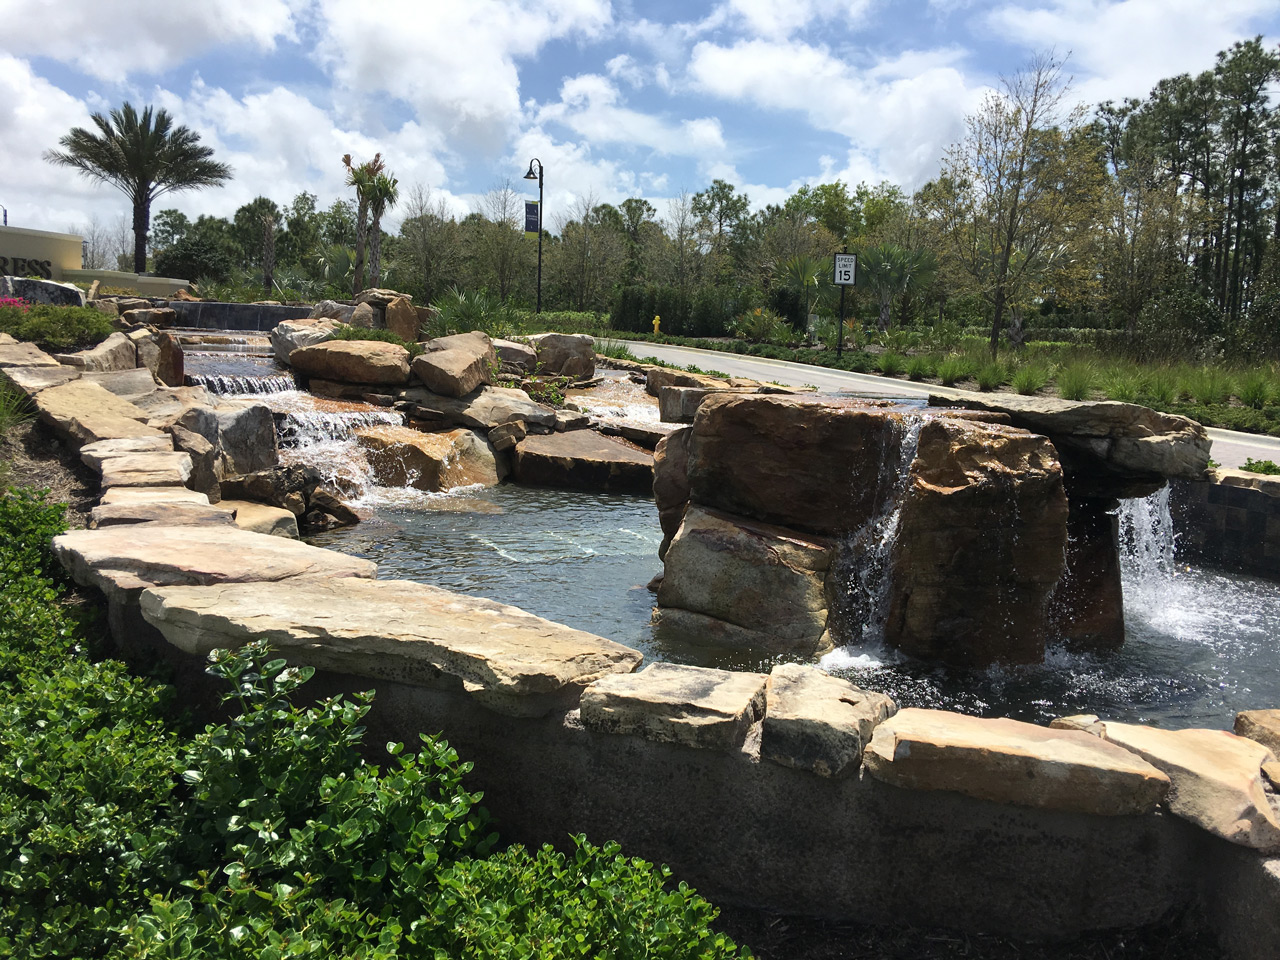 Winding Cypress Naples FL garden entrance and water feature designed and built by Emil Kreye and Son, Inc